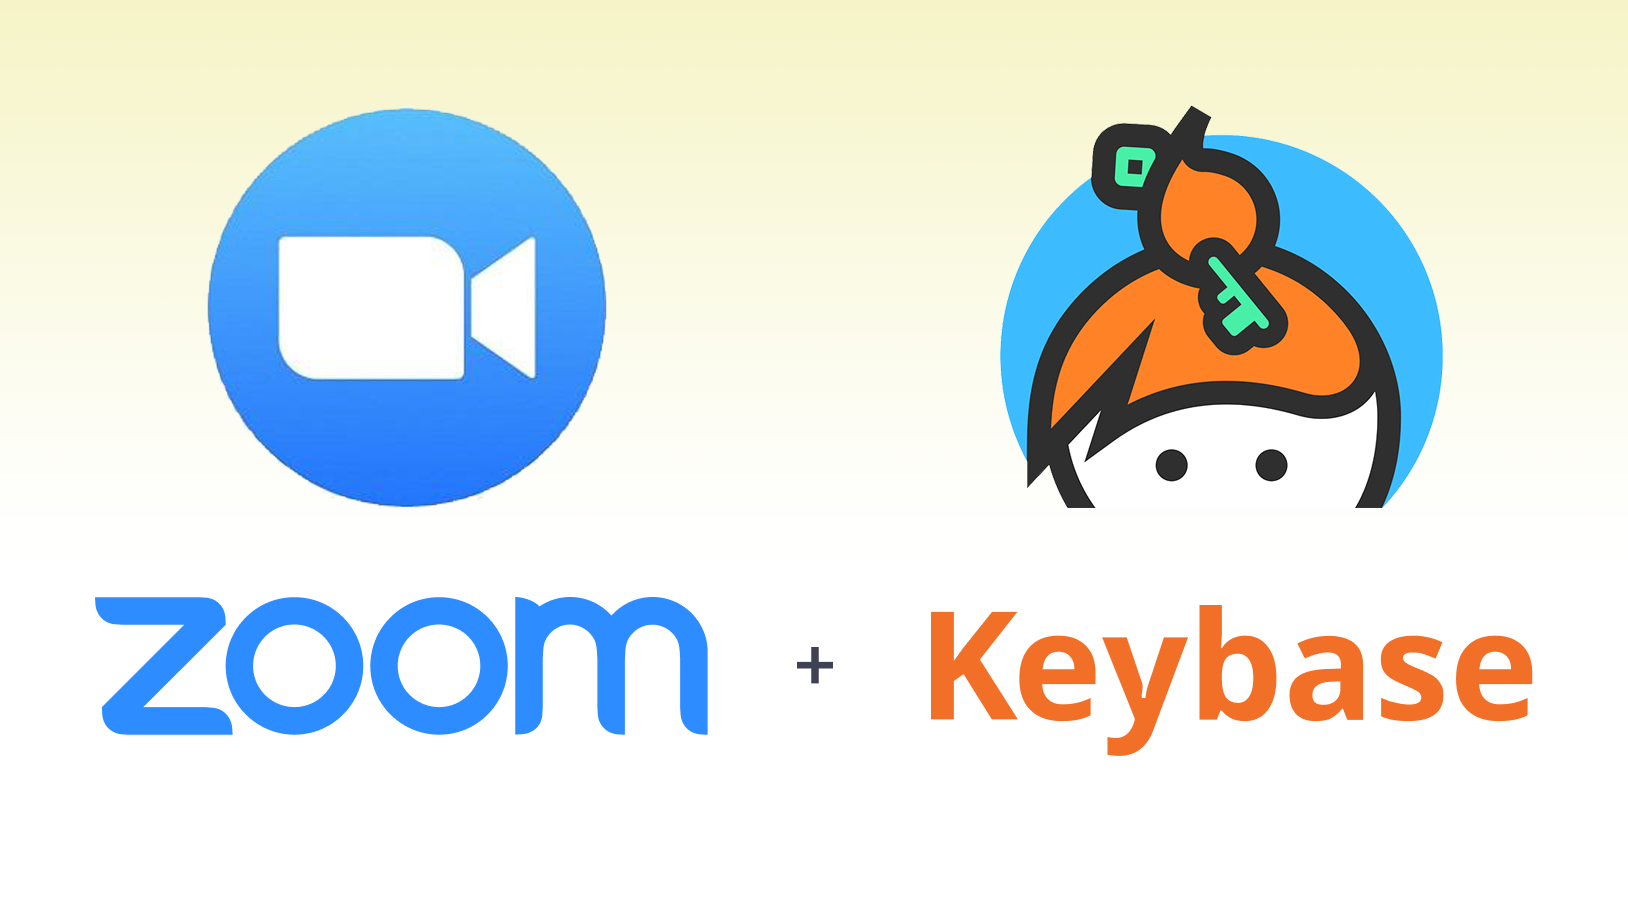 Zoom acquires Keybase to setup and offer enterprise end-to-end encryption